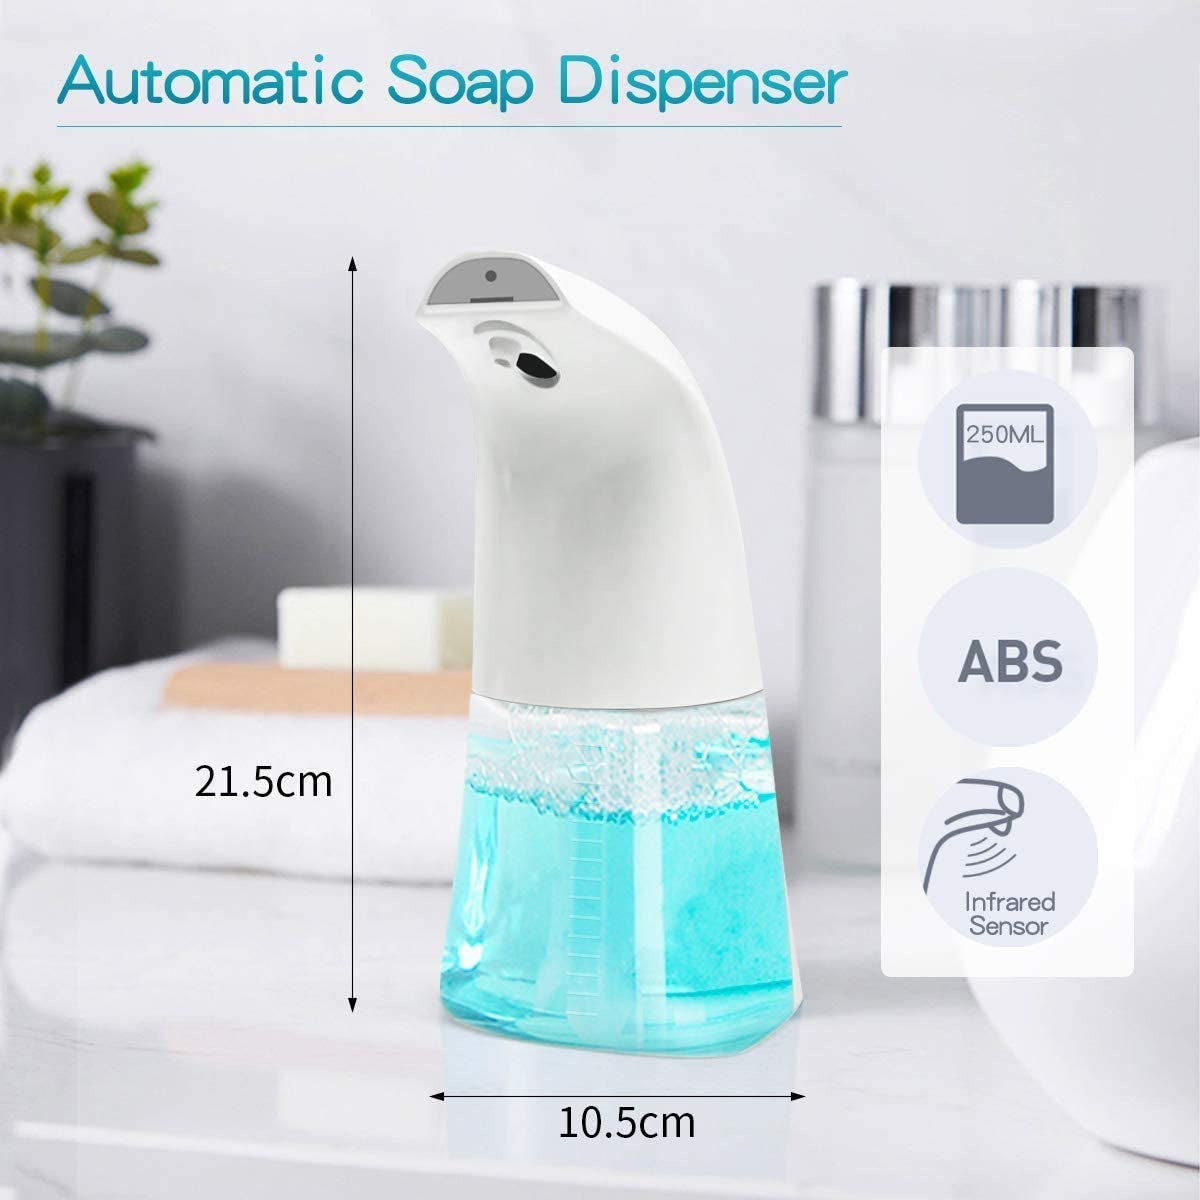 FEBHBRQ, FEBHBRQ Automatic Soap Dispenser, 250ML Infrared Motion Sensor Touchless Hand Free Countertop and Wall Mount Pump Foaming Soap Dispensers for Bathroom, Kitchen, School and Office